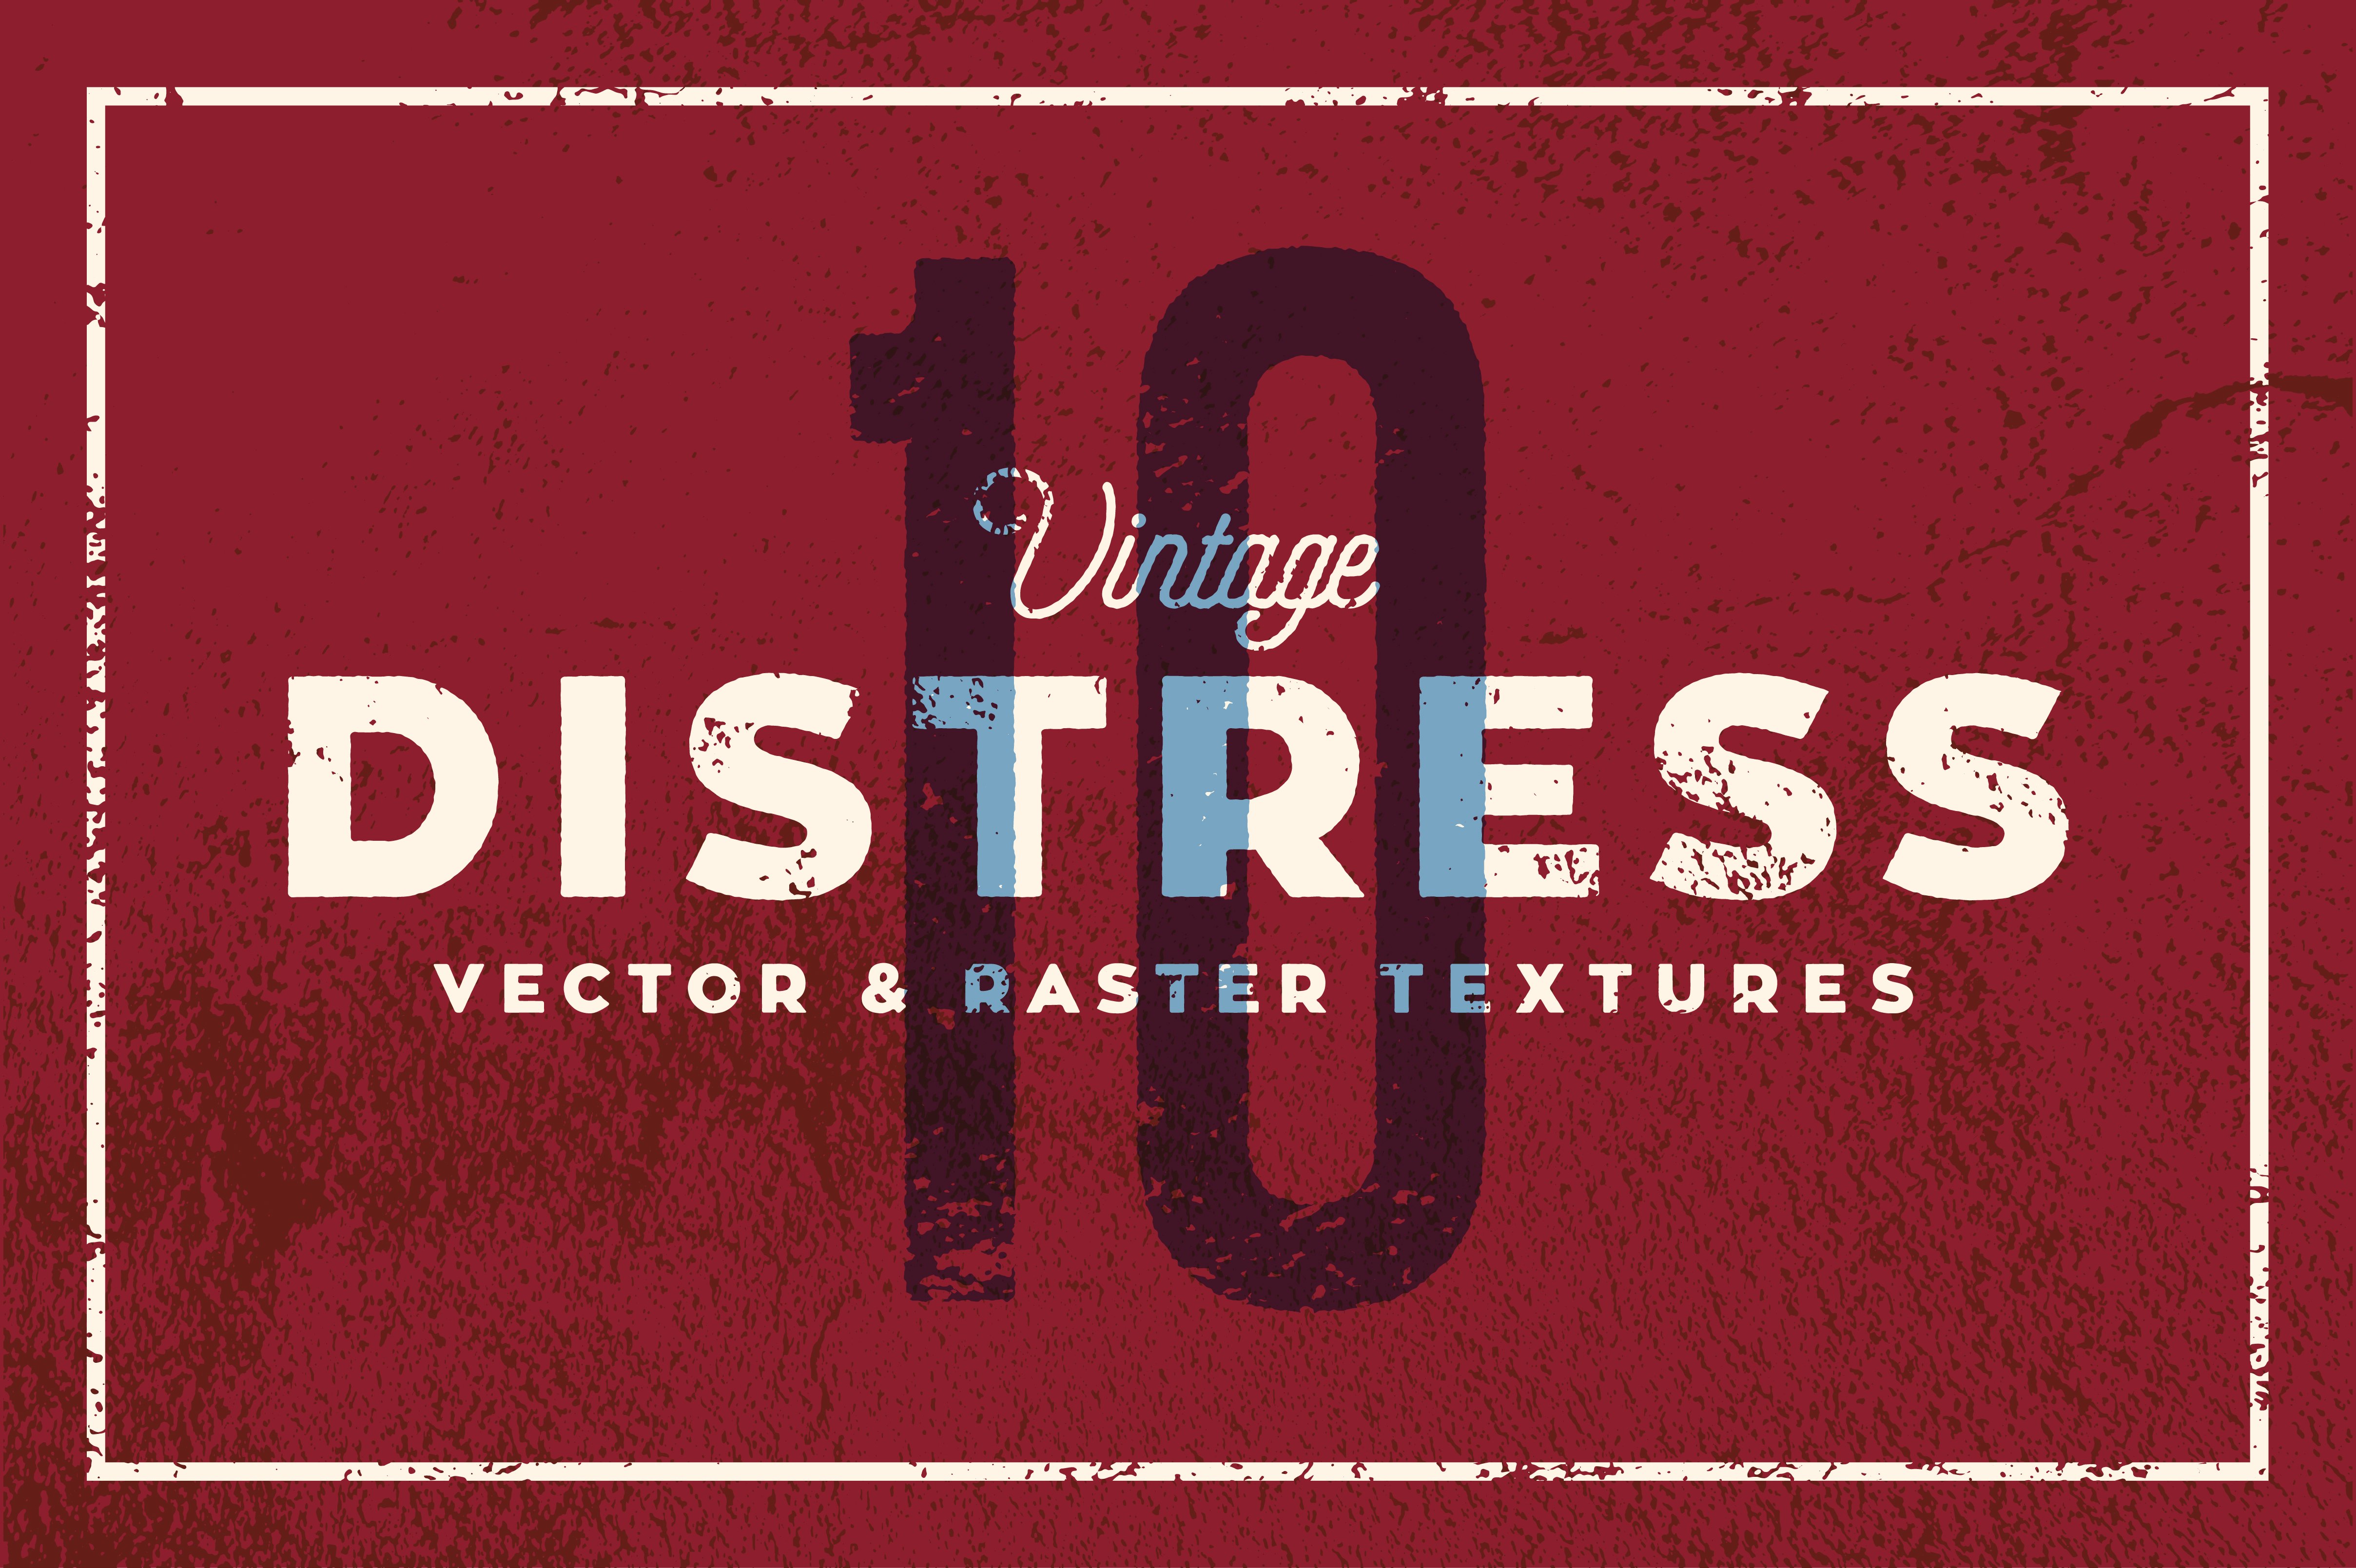 Vintage Distress Textures (10 Pack) cover image.